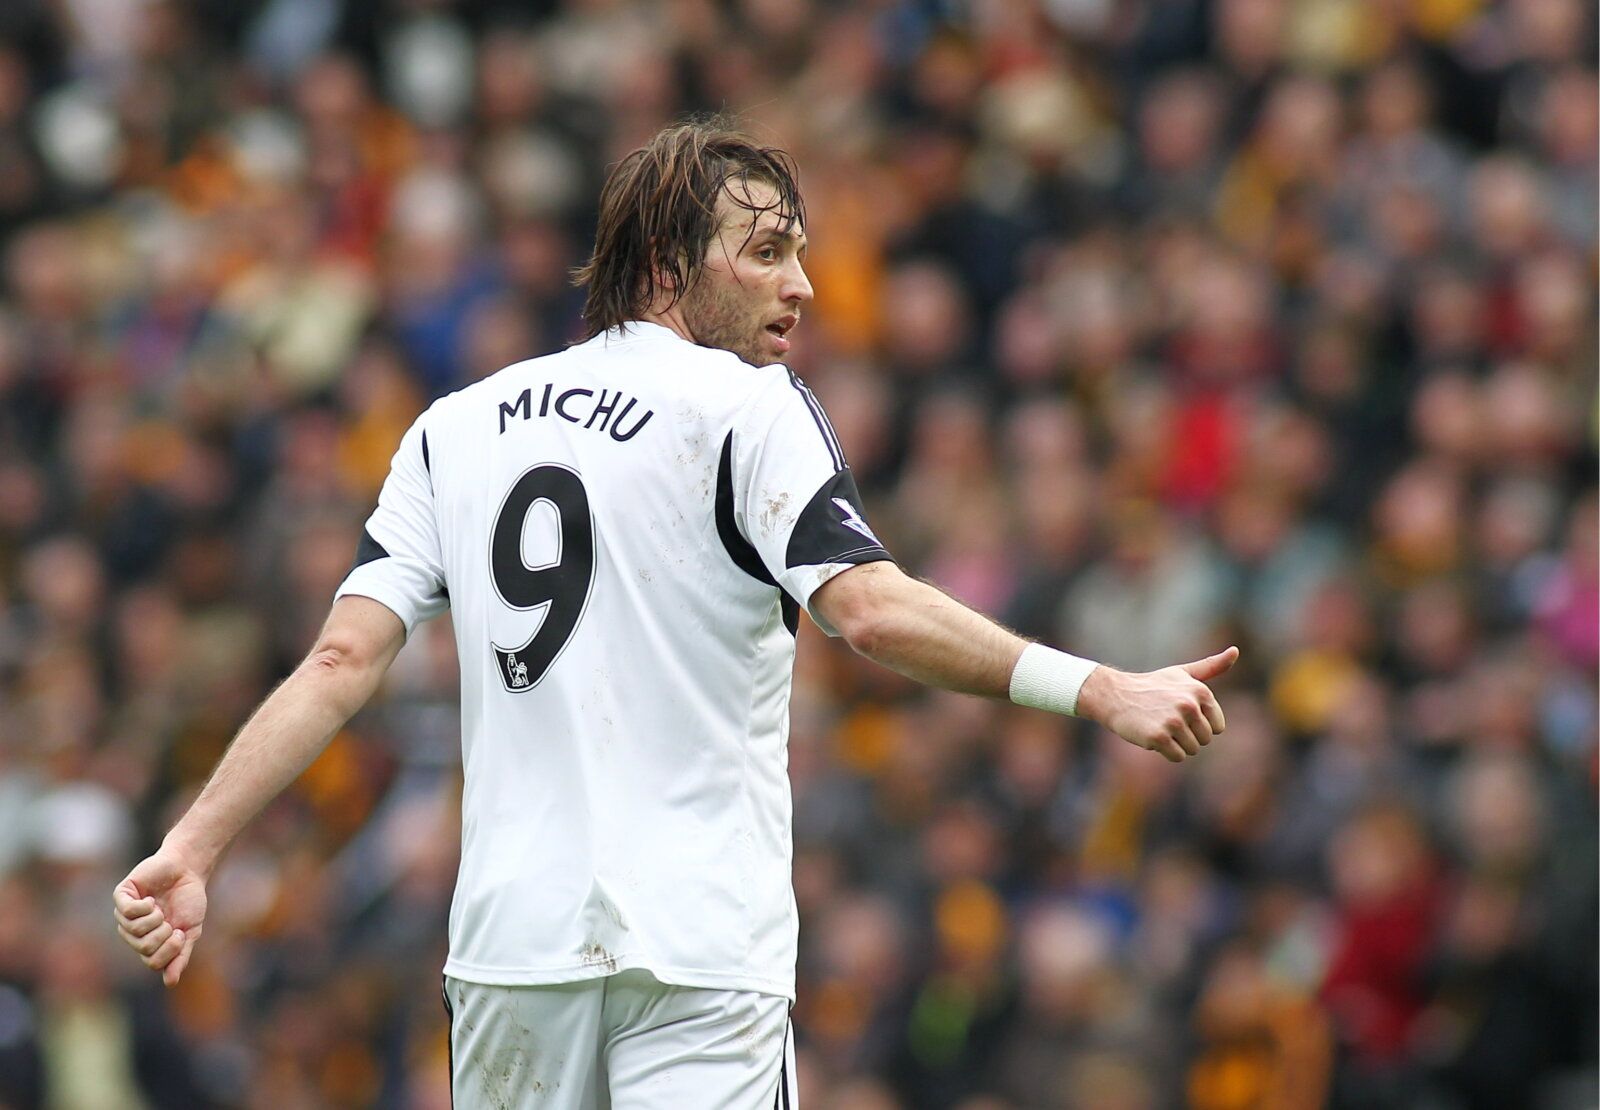 Football - Hull City v Swansea City - Barclays Premier League - The Kingston Communications Stadium - 13/14 - 5/4/14 
Michu - Hull City  
Mandatory Credit: Action Images / Ed Sykes 
EDITORIAL USE ONLY. No use with unauthorized audio, video, data, fixture lists, club/league logos or 